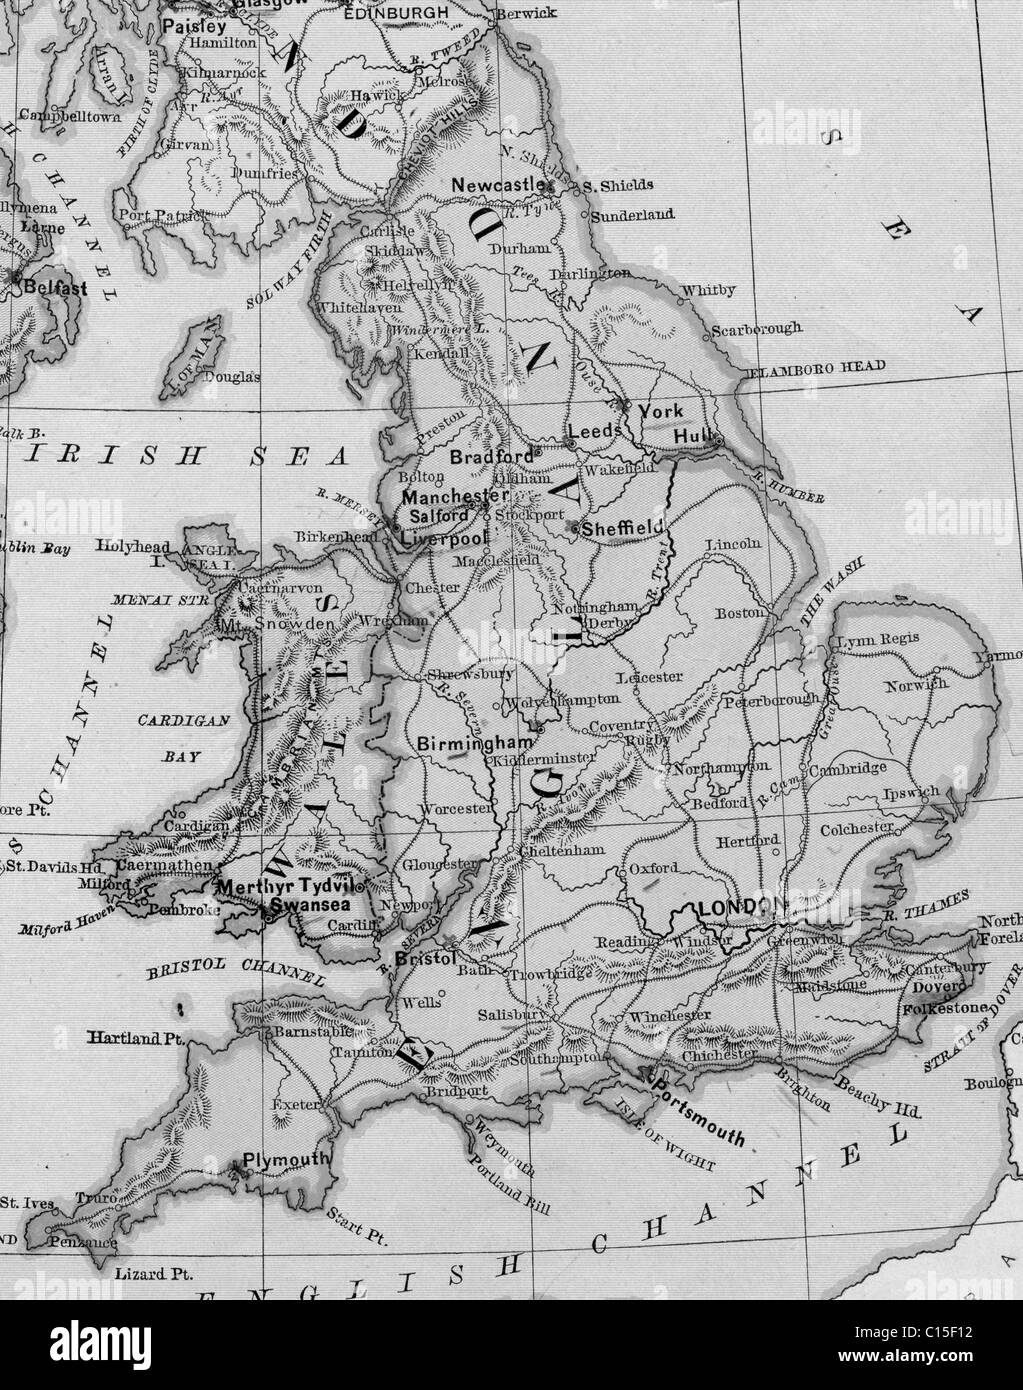 Old map of England from original geography textbook, 1865 Stock Photo